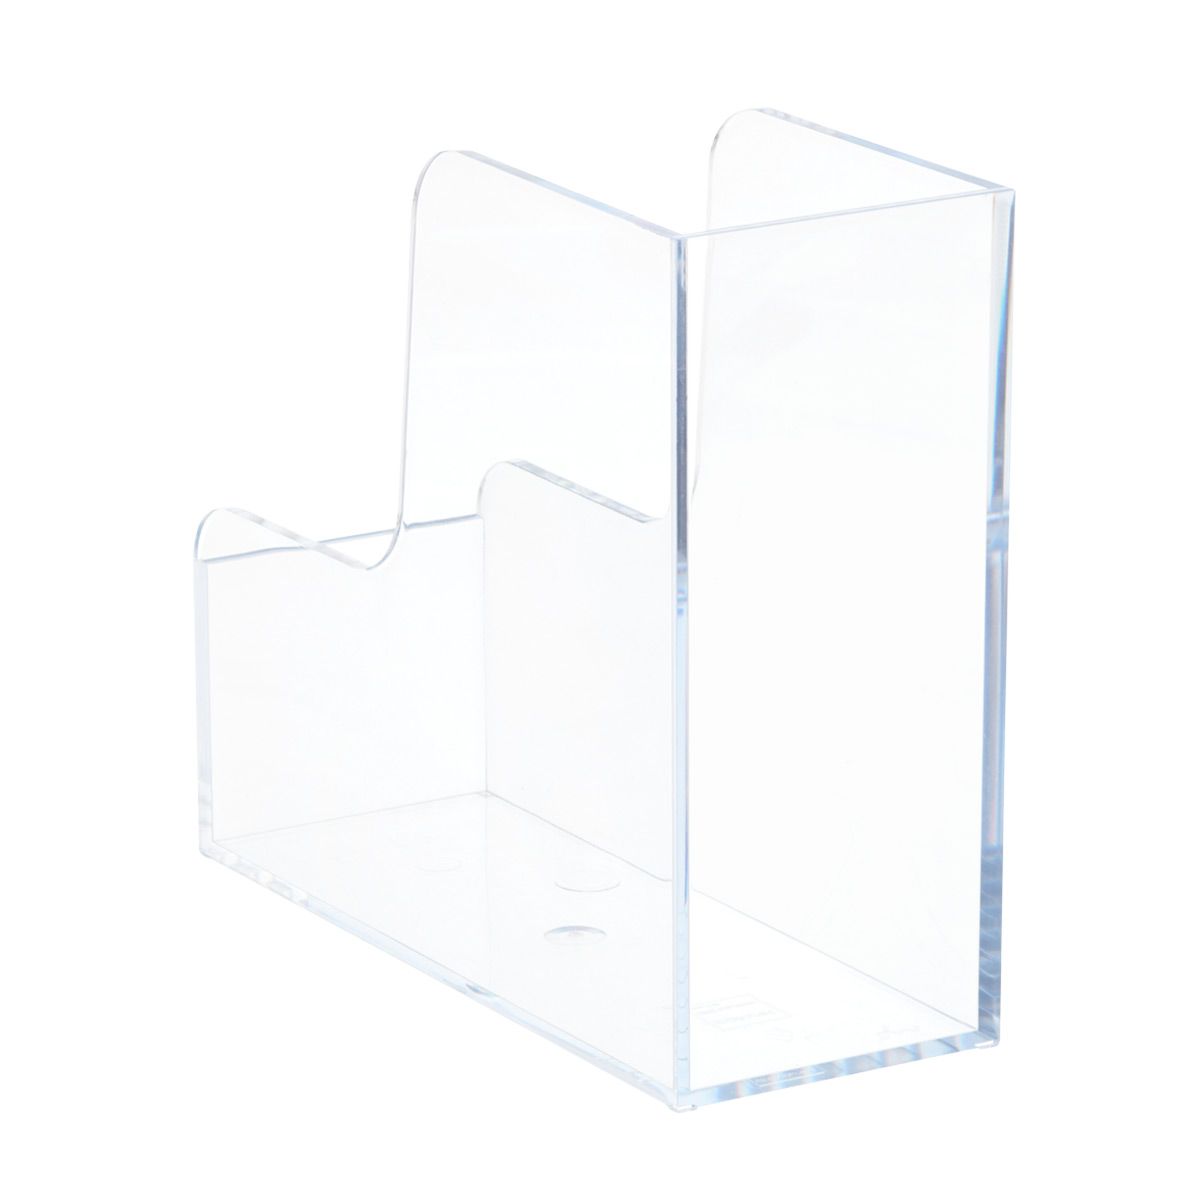 Magazine Holder | The Container Store